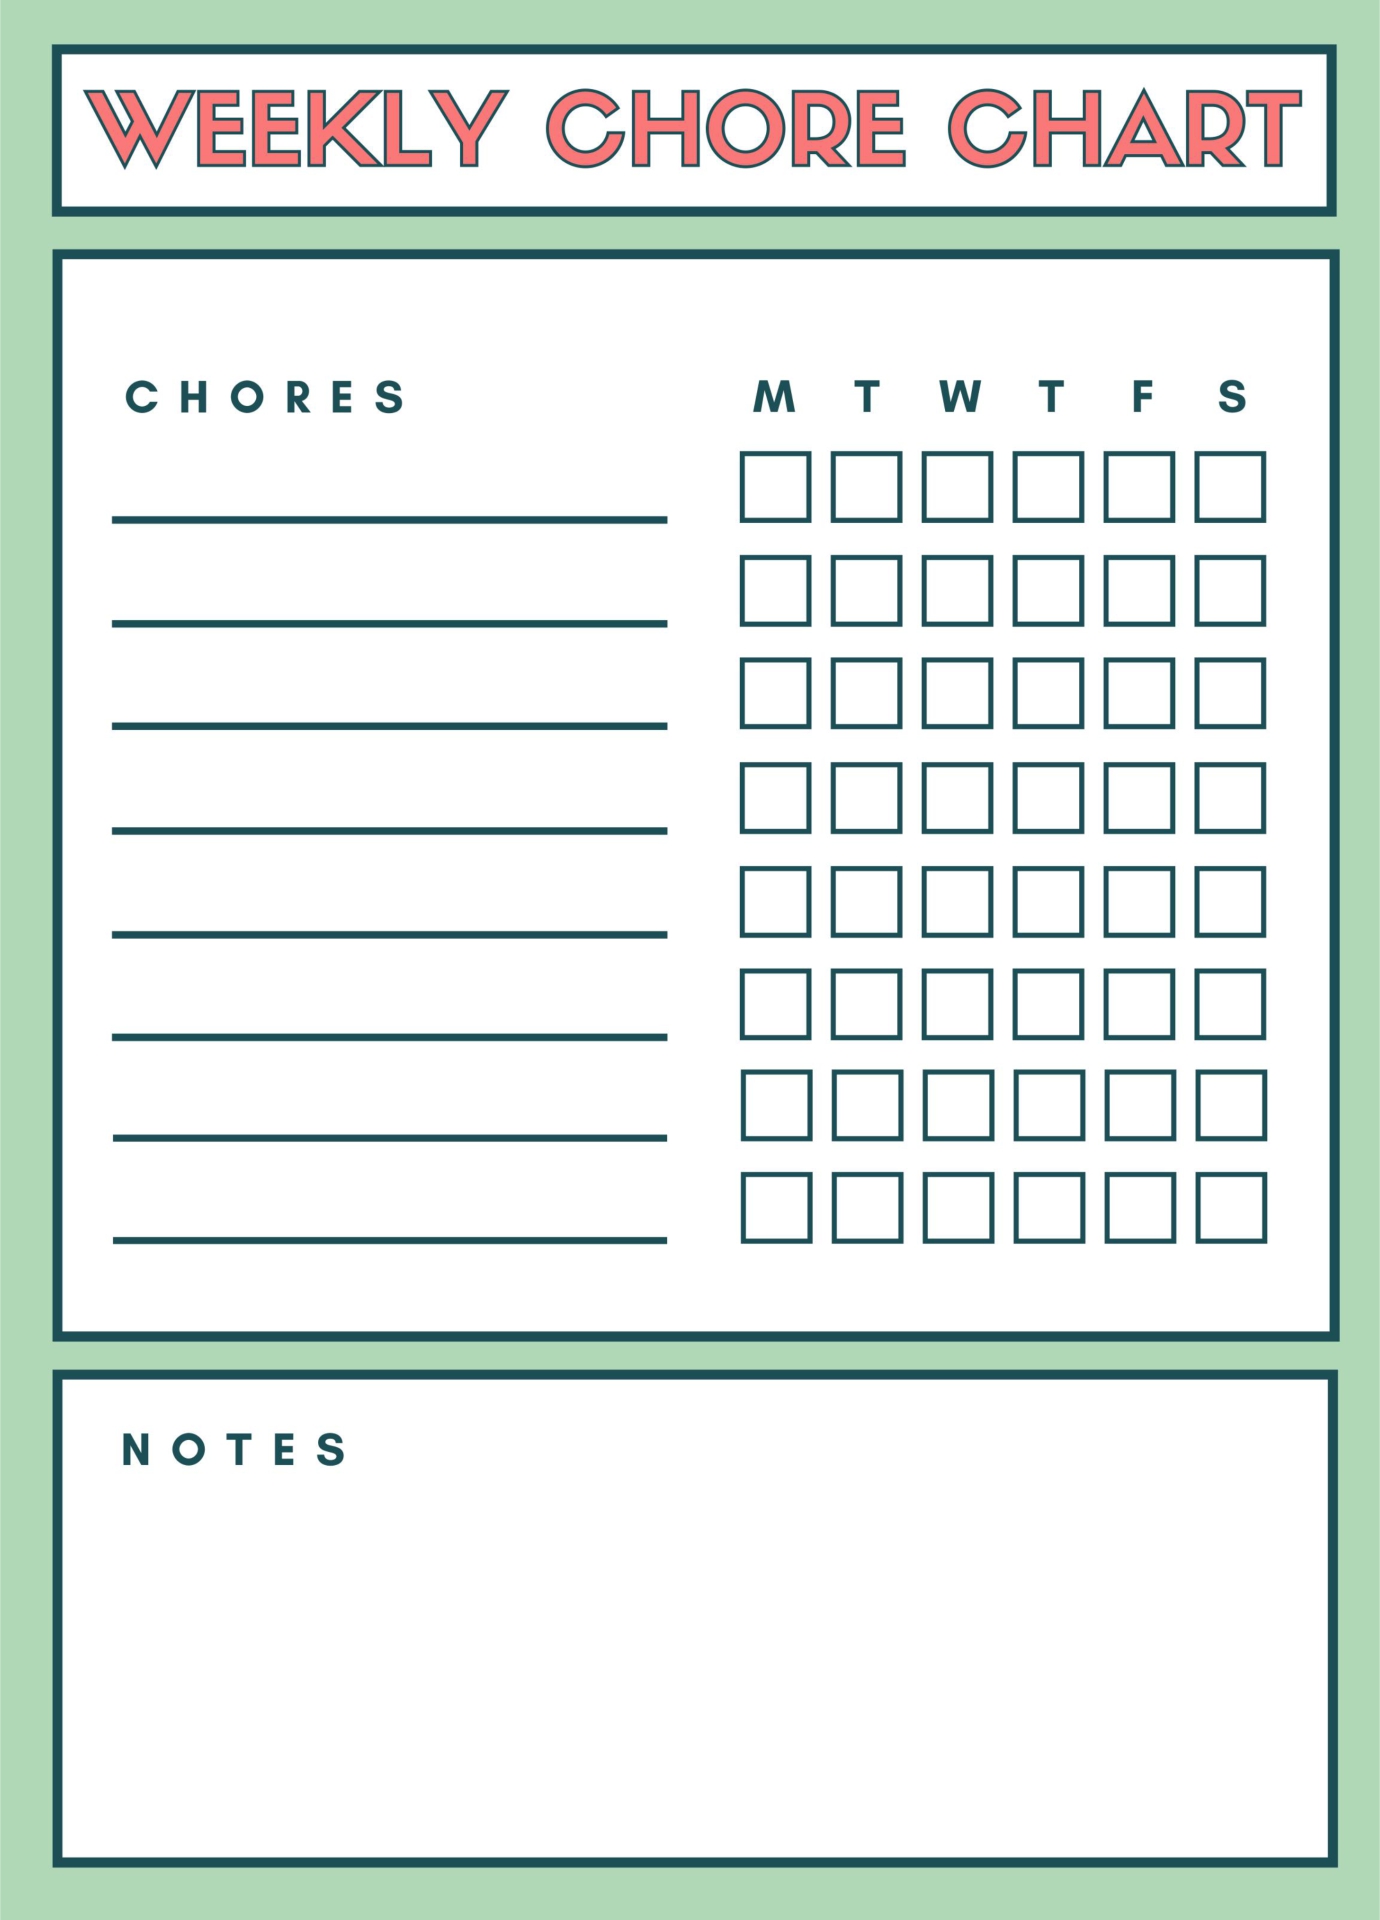 9-best-images-of-printable-weekly-chore-chart-weekly-chore-chart-blank-weekly-chore-chart